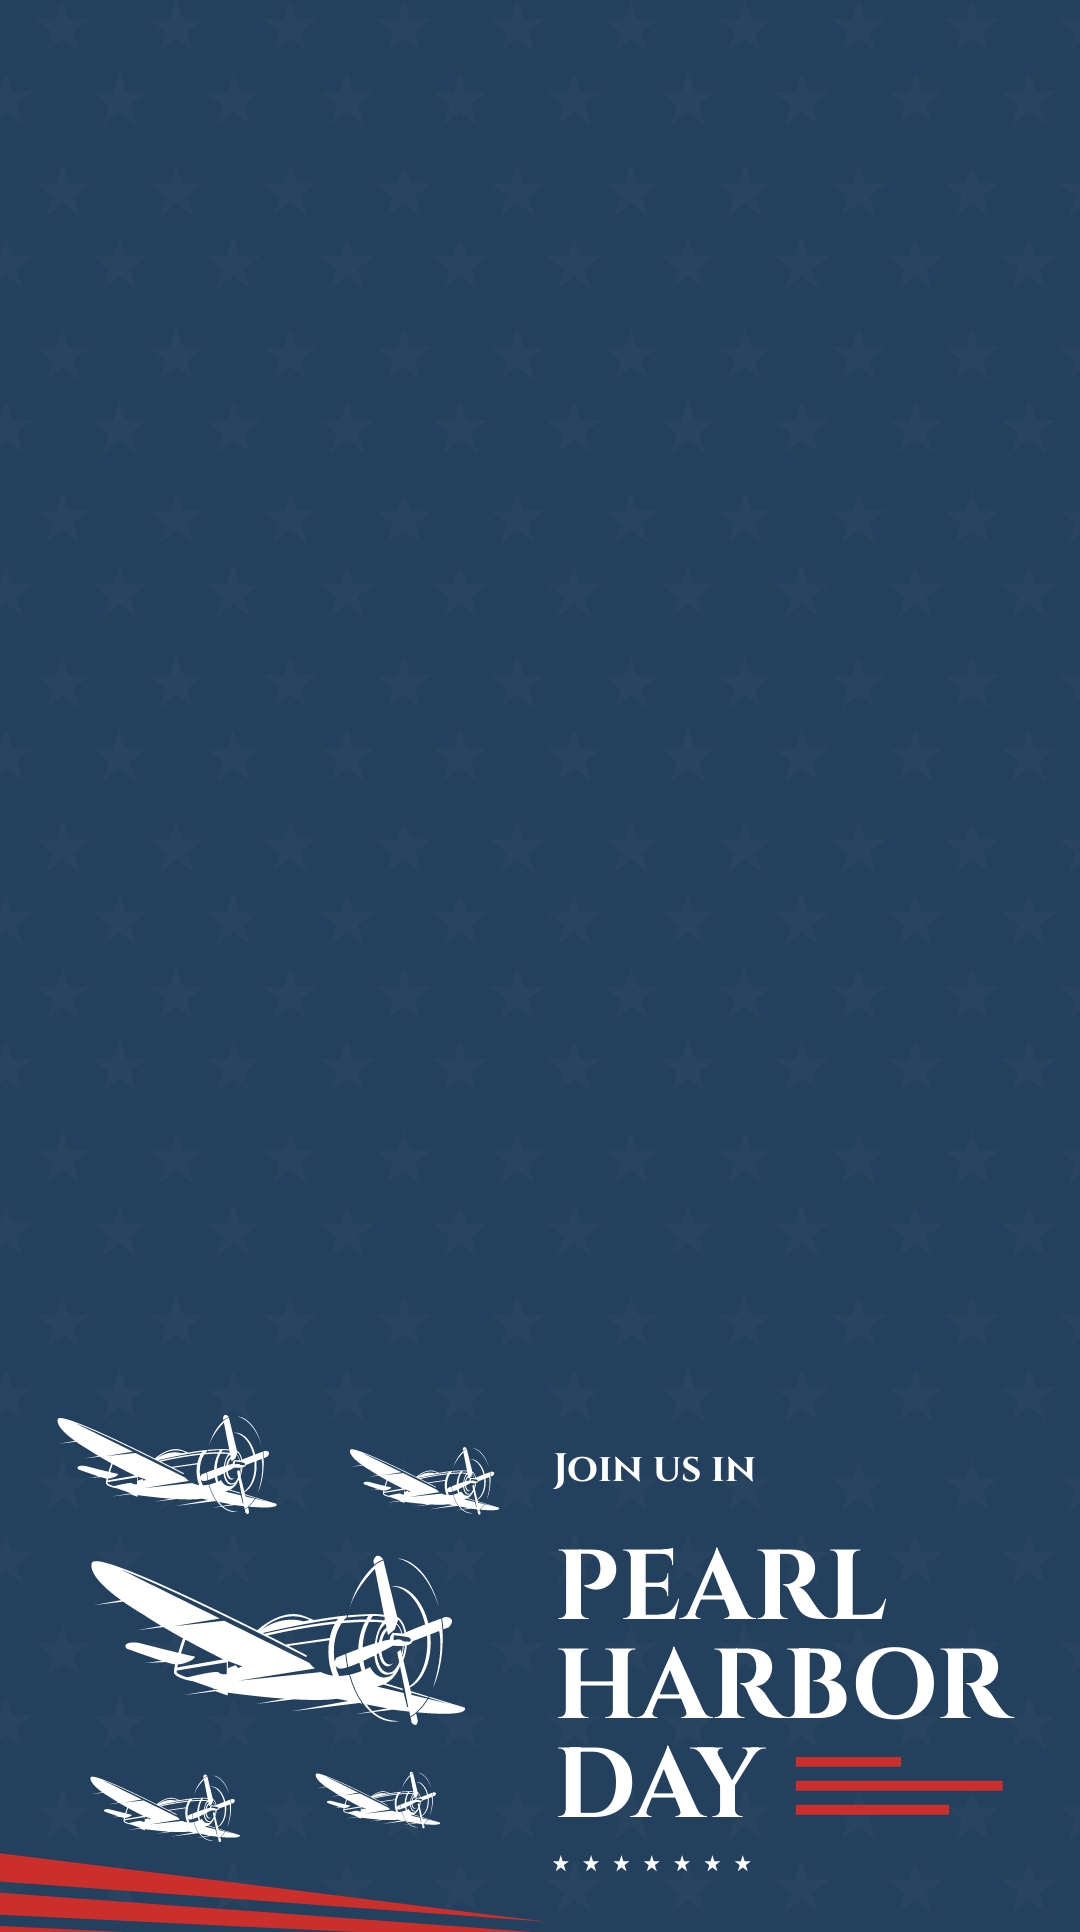 Free Pearl Harbor Day Event Snapchat Geofilter Template